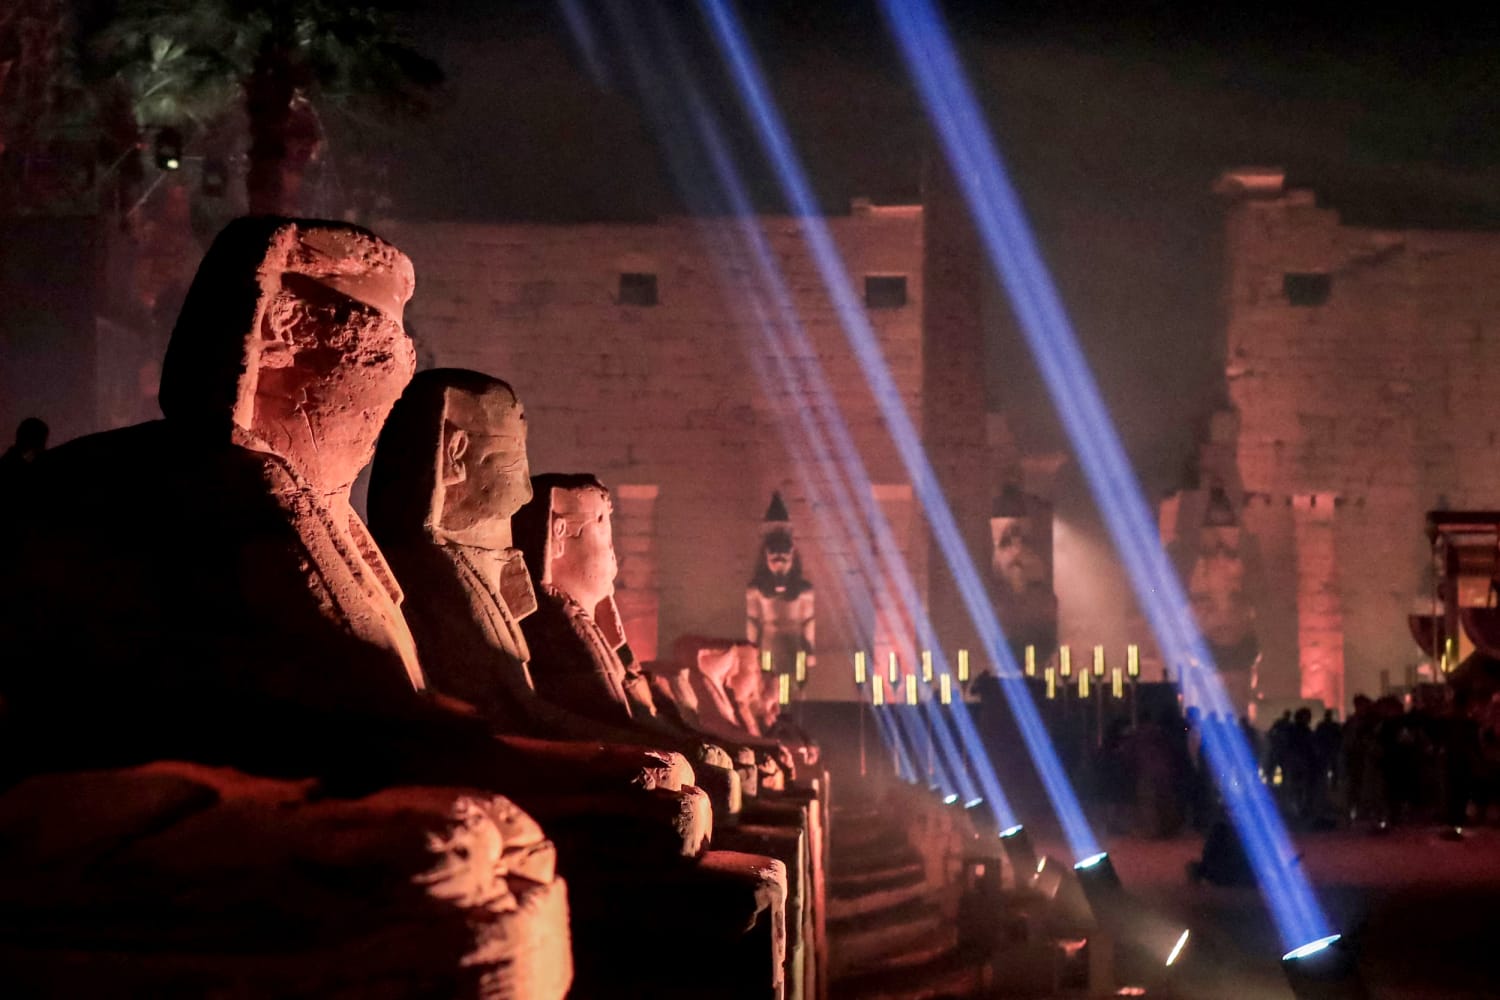 Covered in sand for centuries, Egypt reopens sphinx avenue with huge celebration